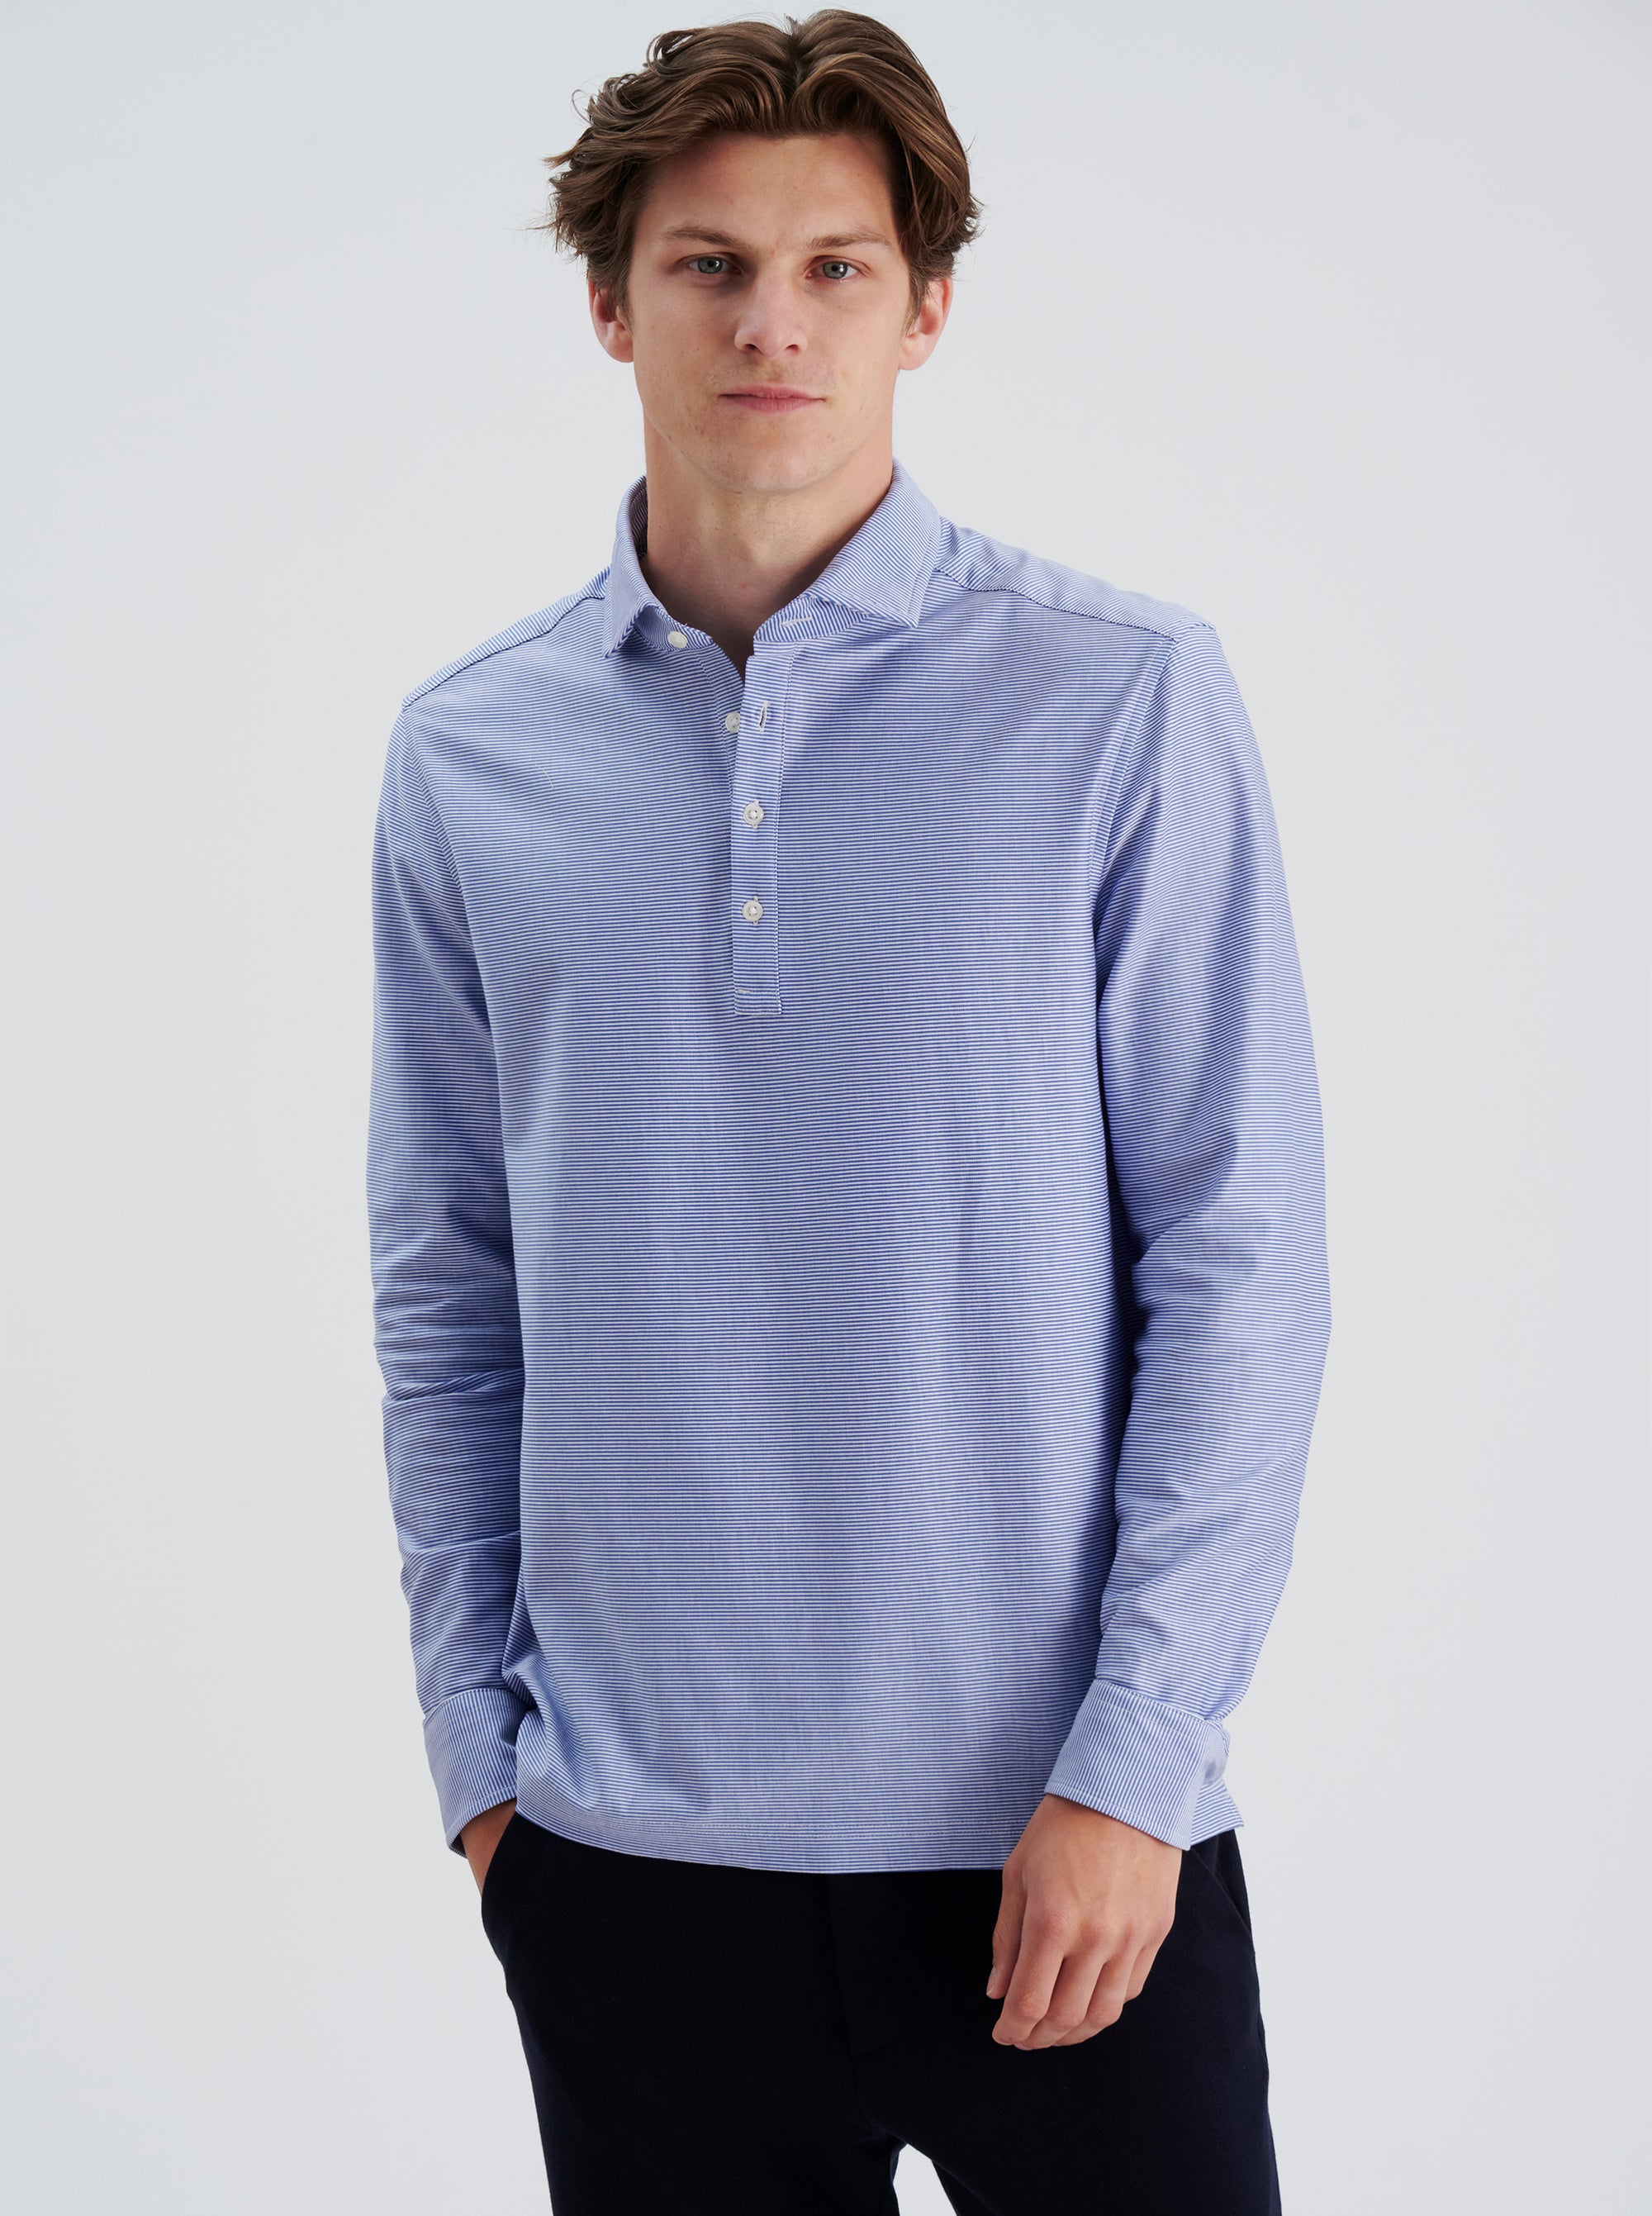 Is a Polo Shirt Business Casual?